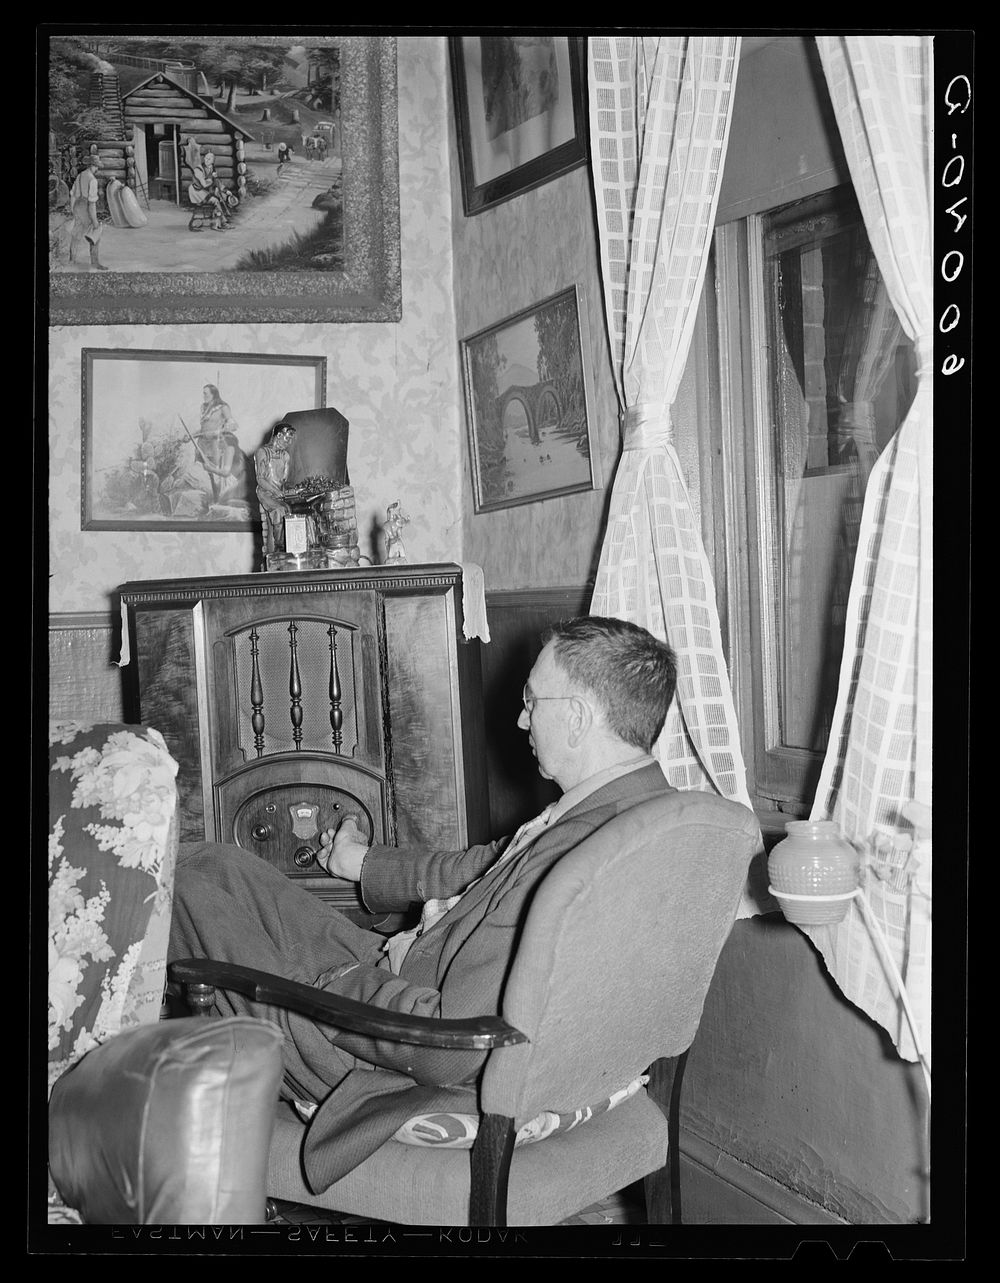 Man listening to radio in hotel lobby. Del Monte Hotel, Elkins, West Virginia. Sourced from the Library of Congress.